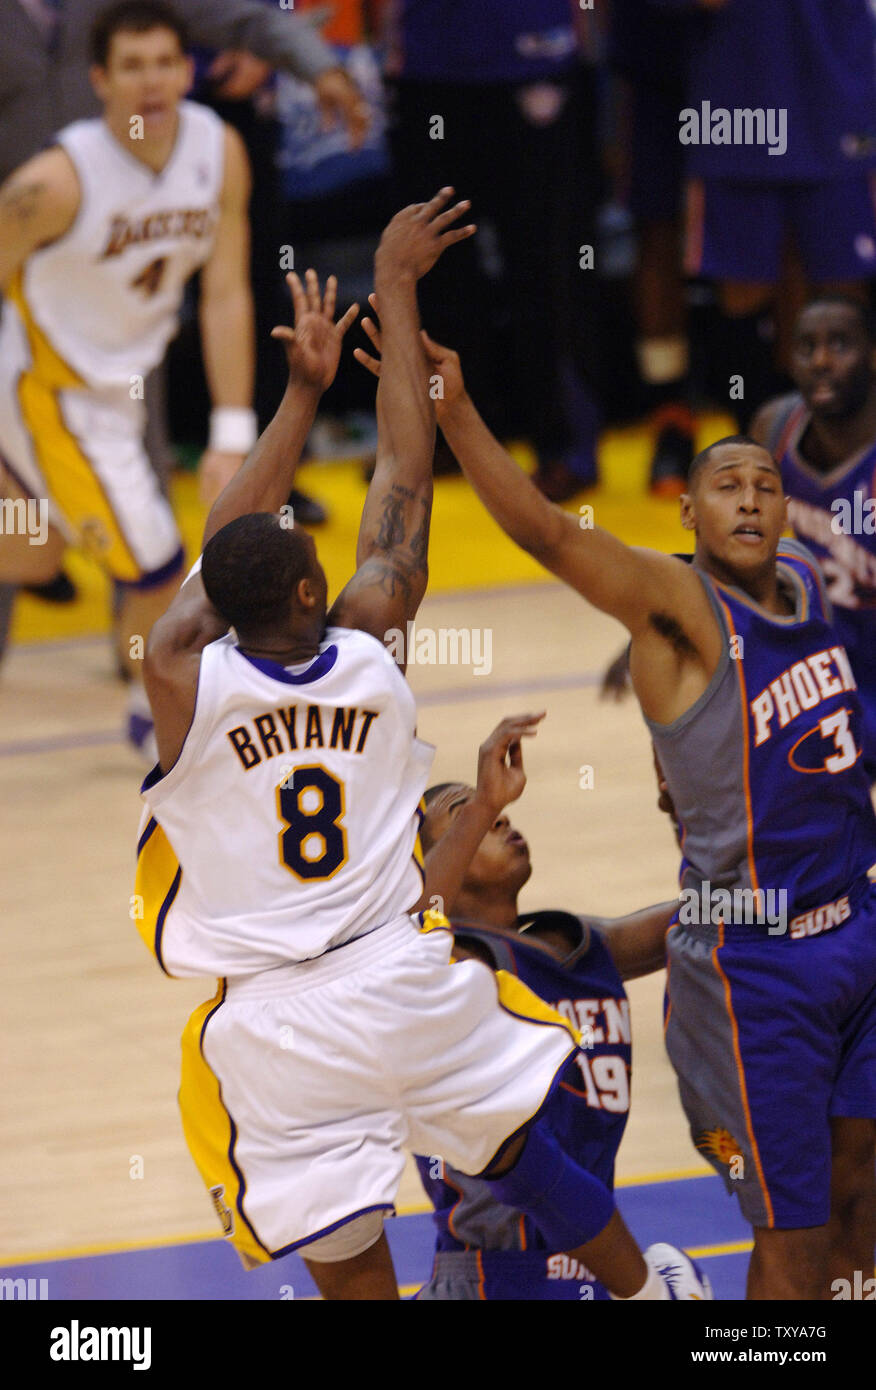 2008 Finals Game 3: Kobe Bryant pours in 36 to help Lakers secure